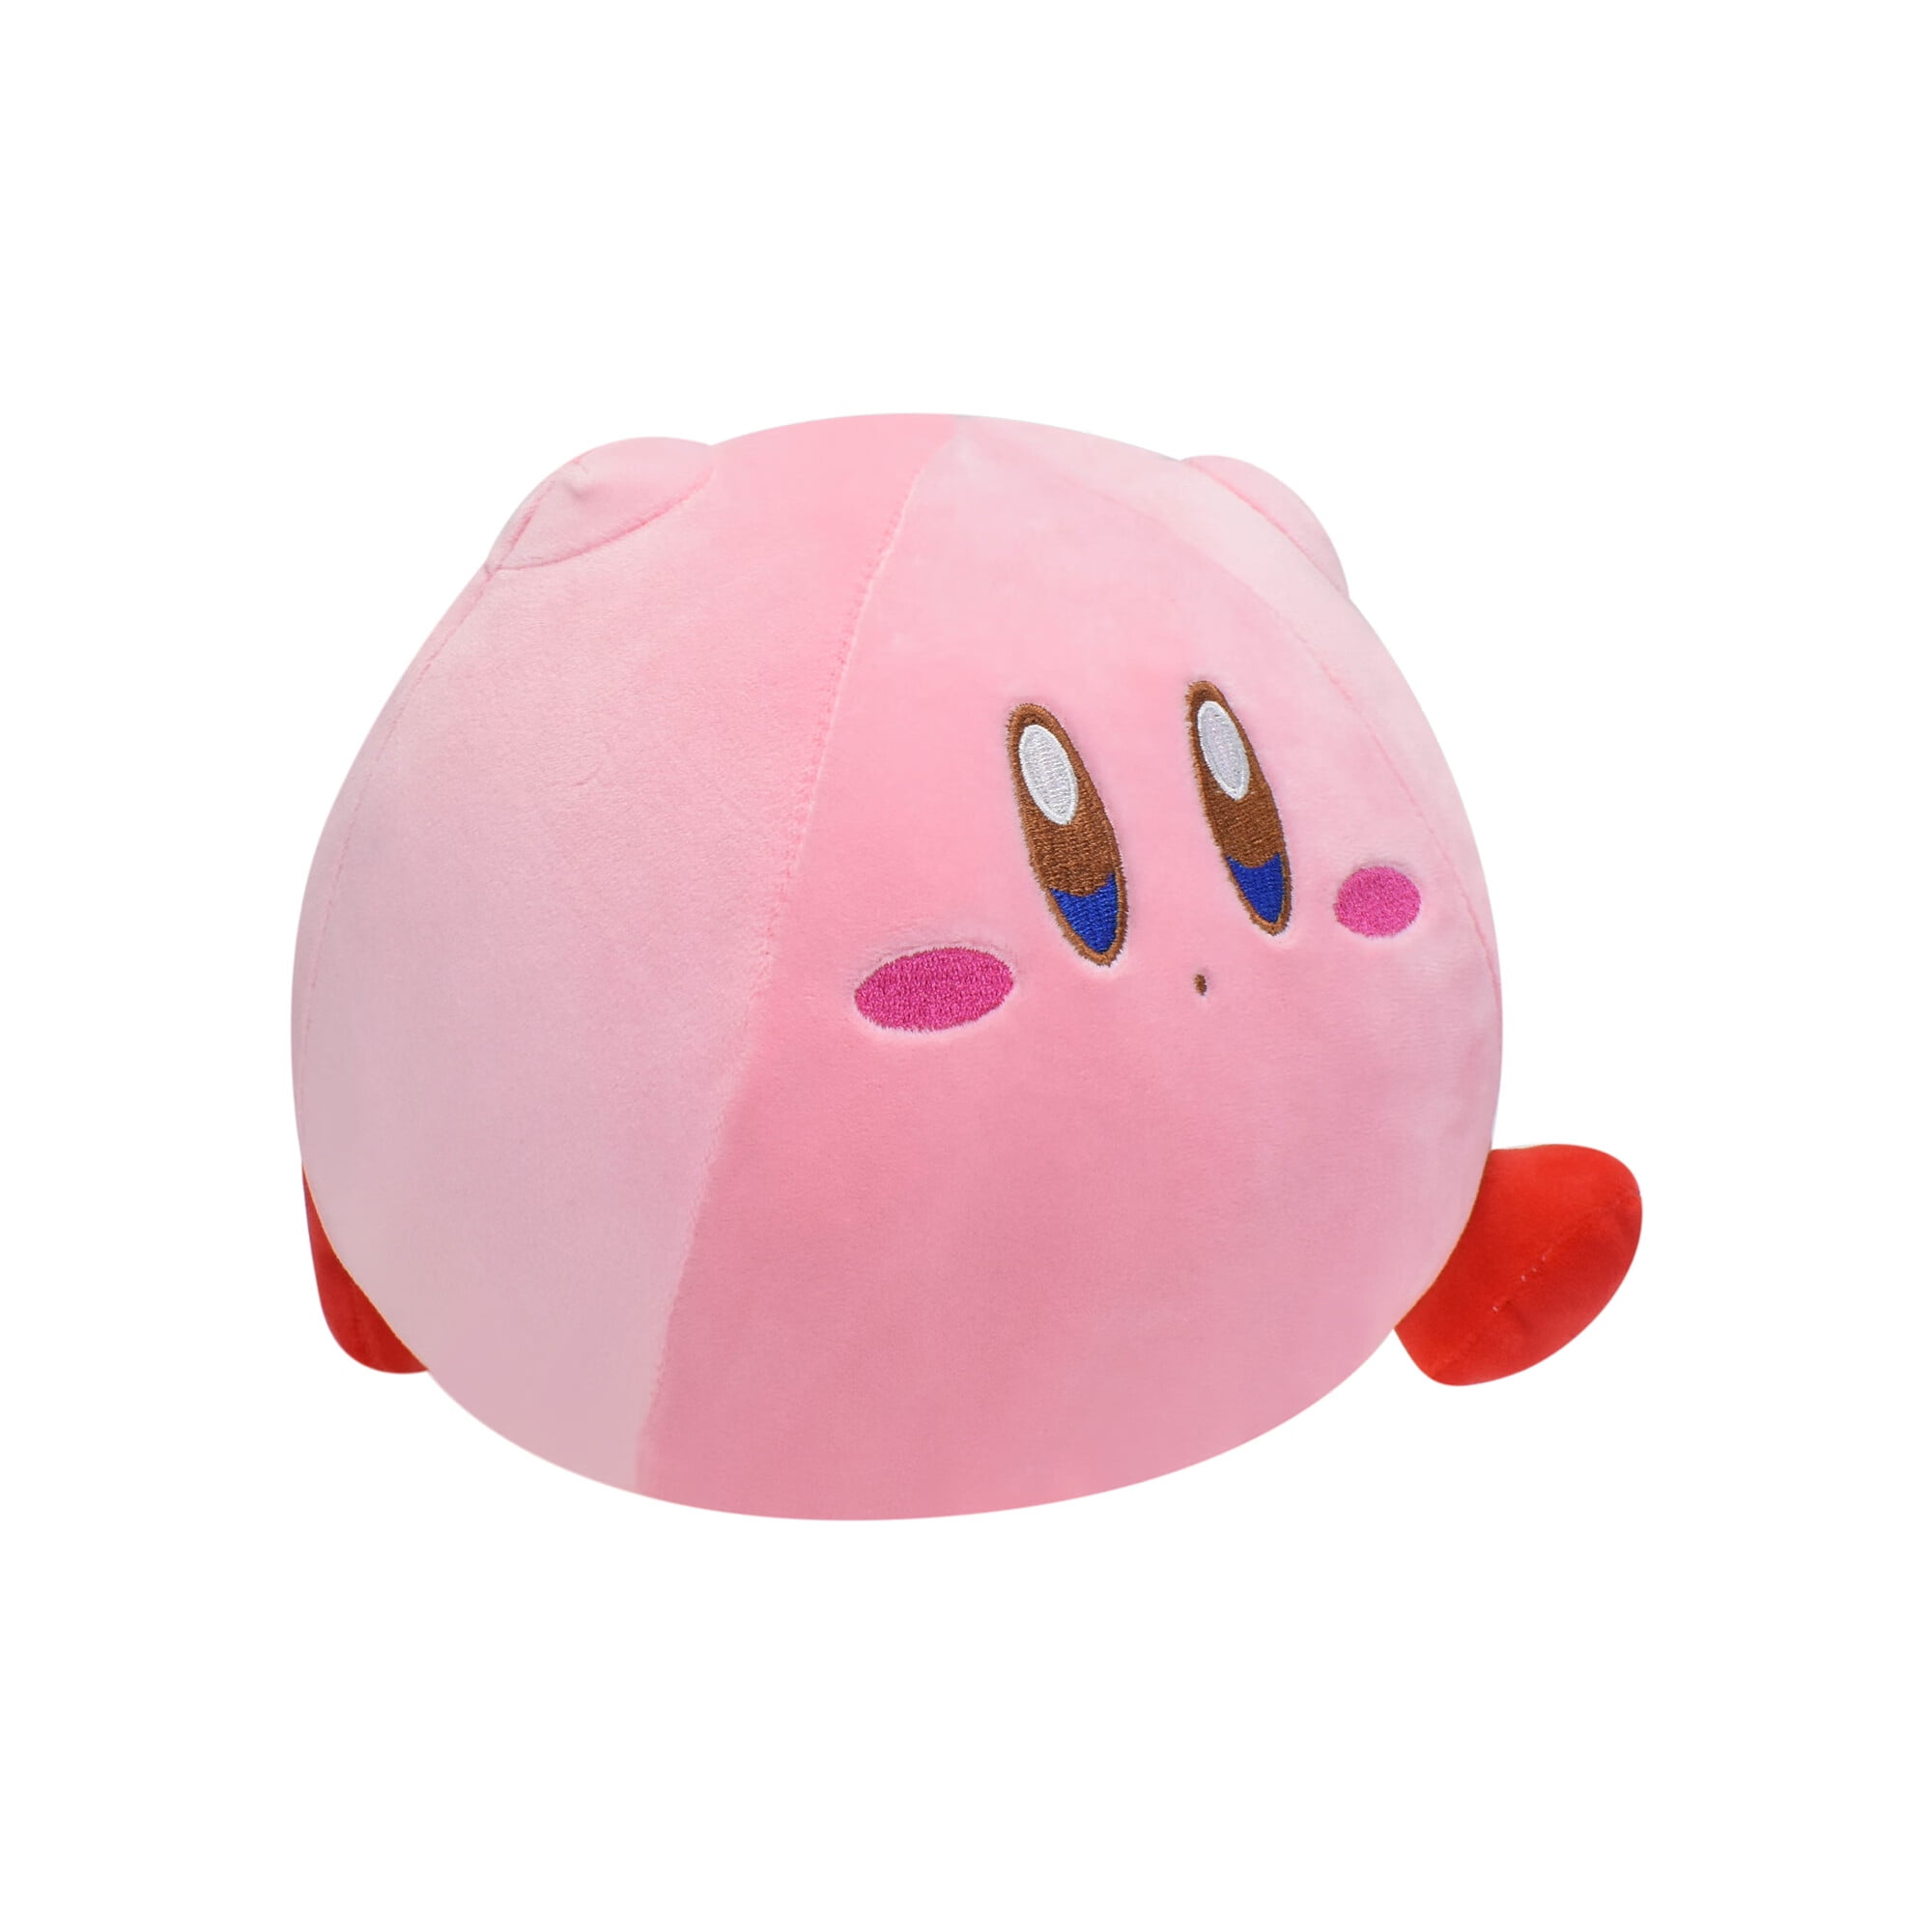 Gudo Kirby Plush Toy 18*24cm Round Kirby Stuffed Animal, Cute Game Doll for  Collectible Cartoon Gift, Boys Girls Gift on Birthday 